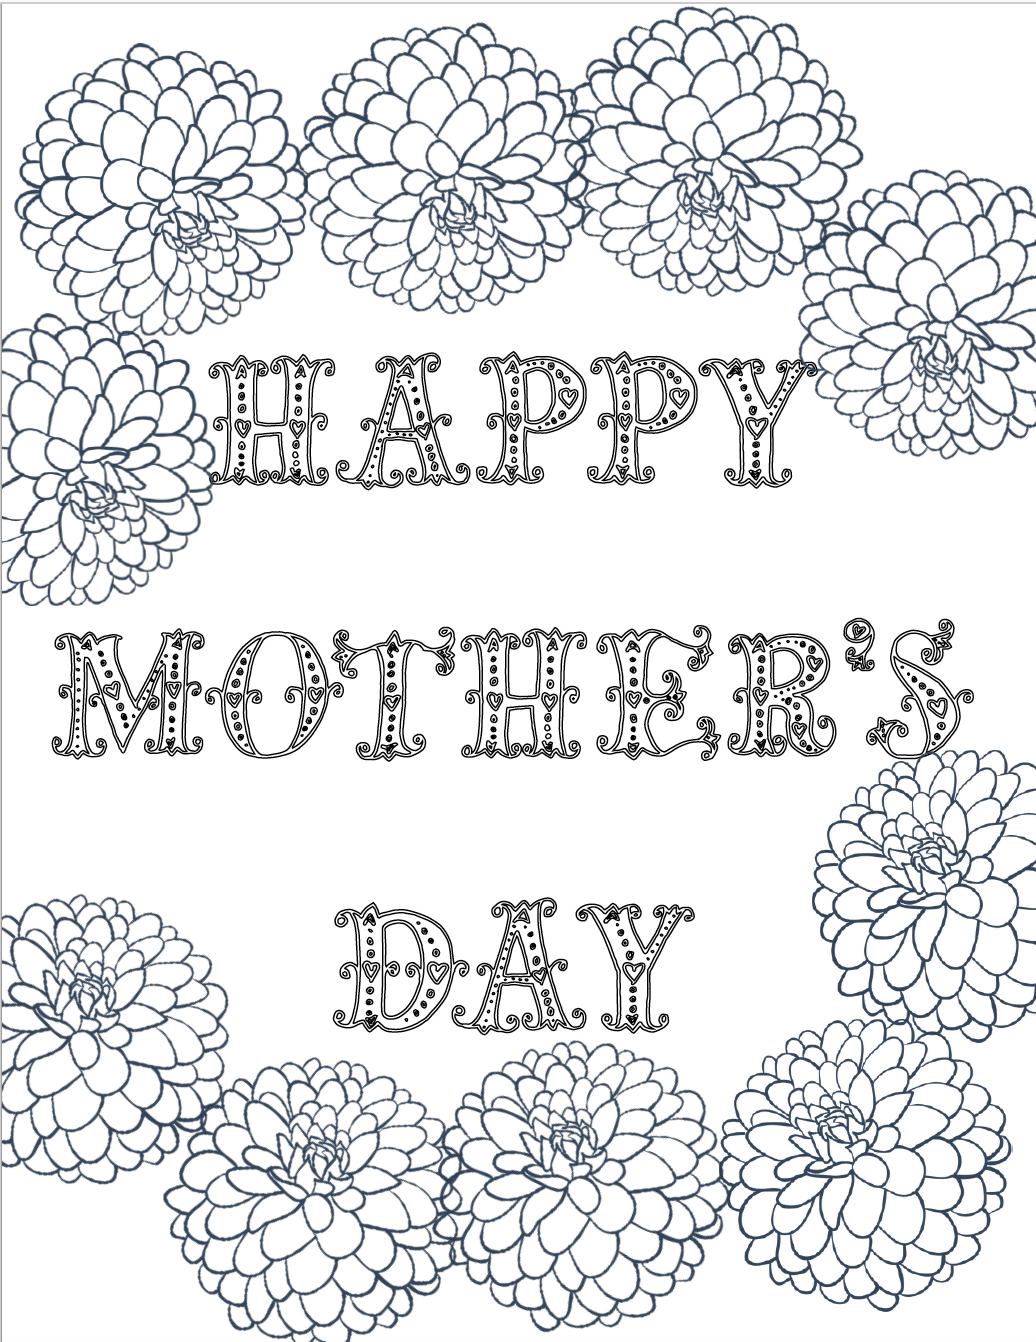 Free Printable Mother s Day Coloring Pages: 4 Designs